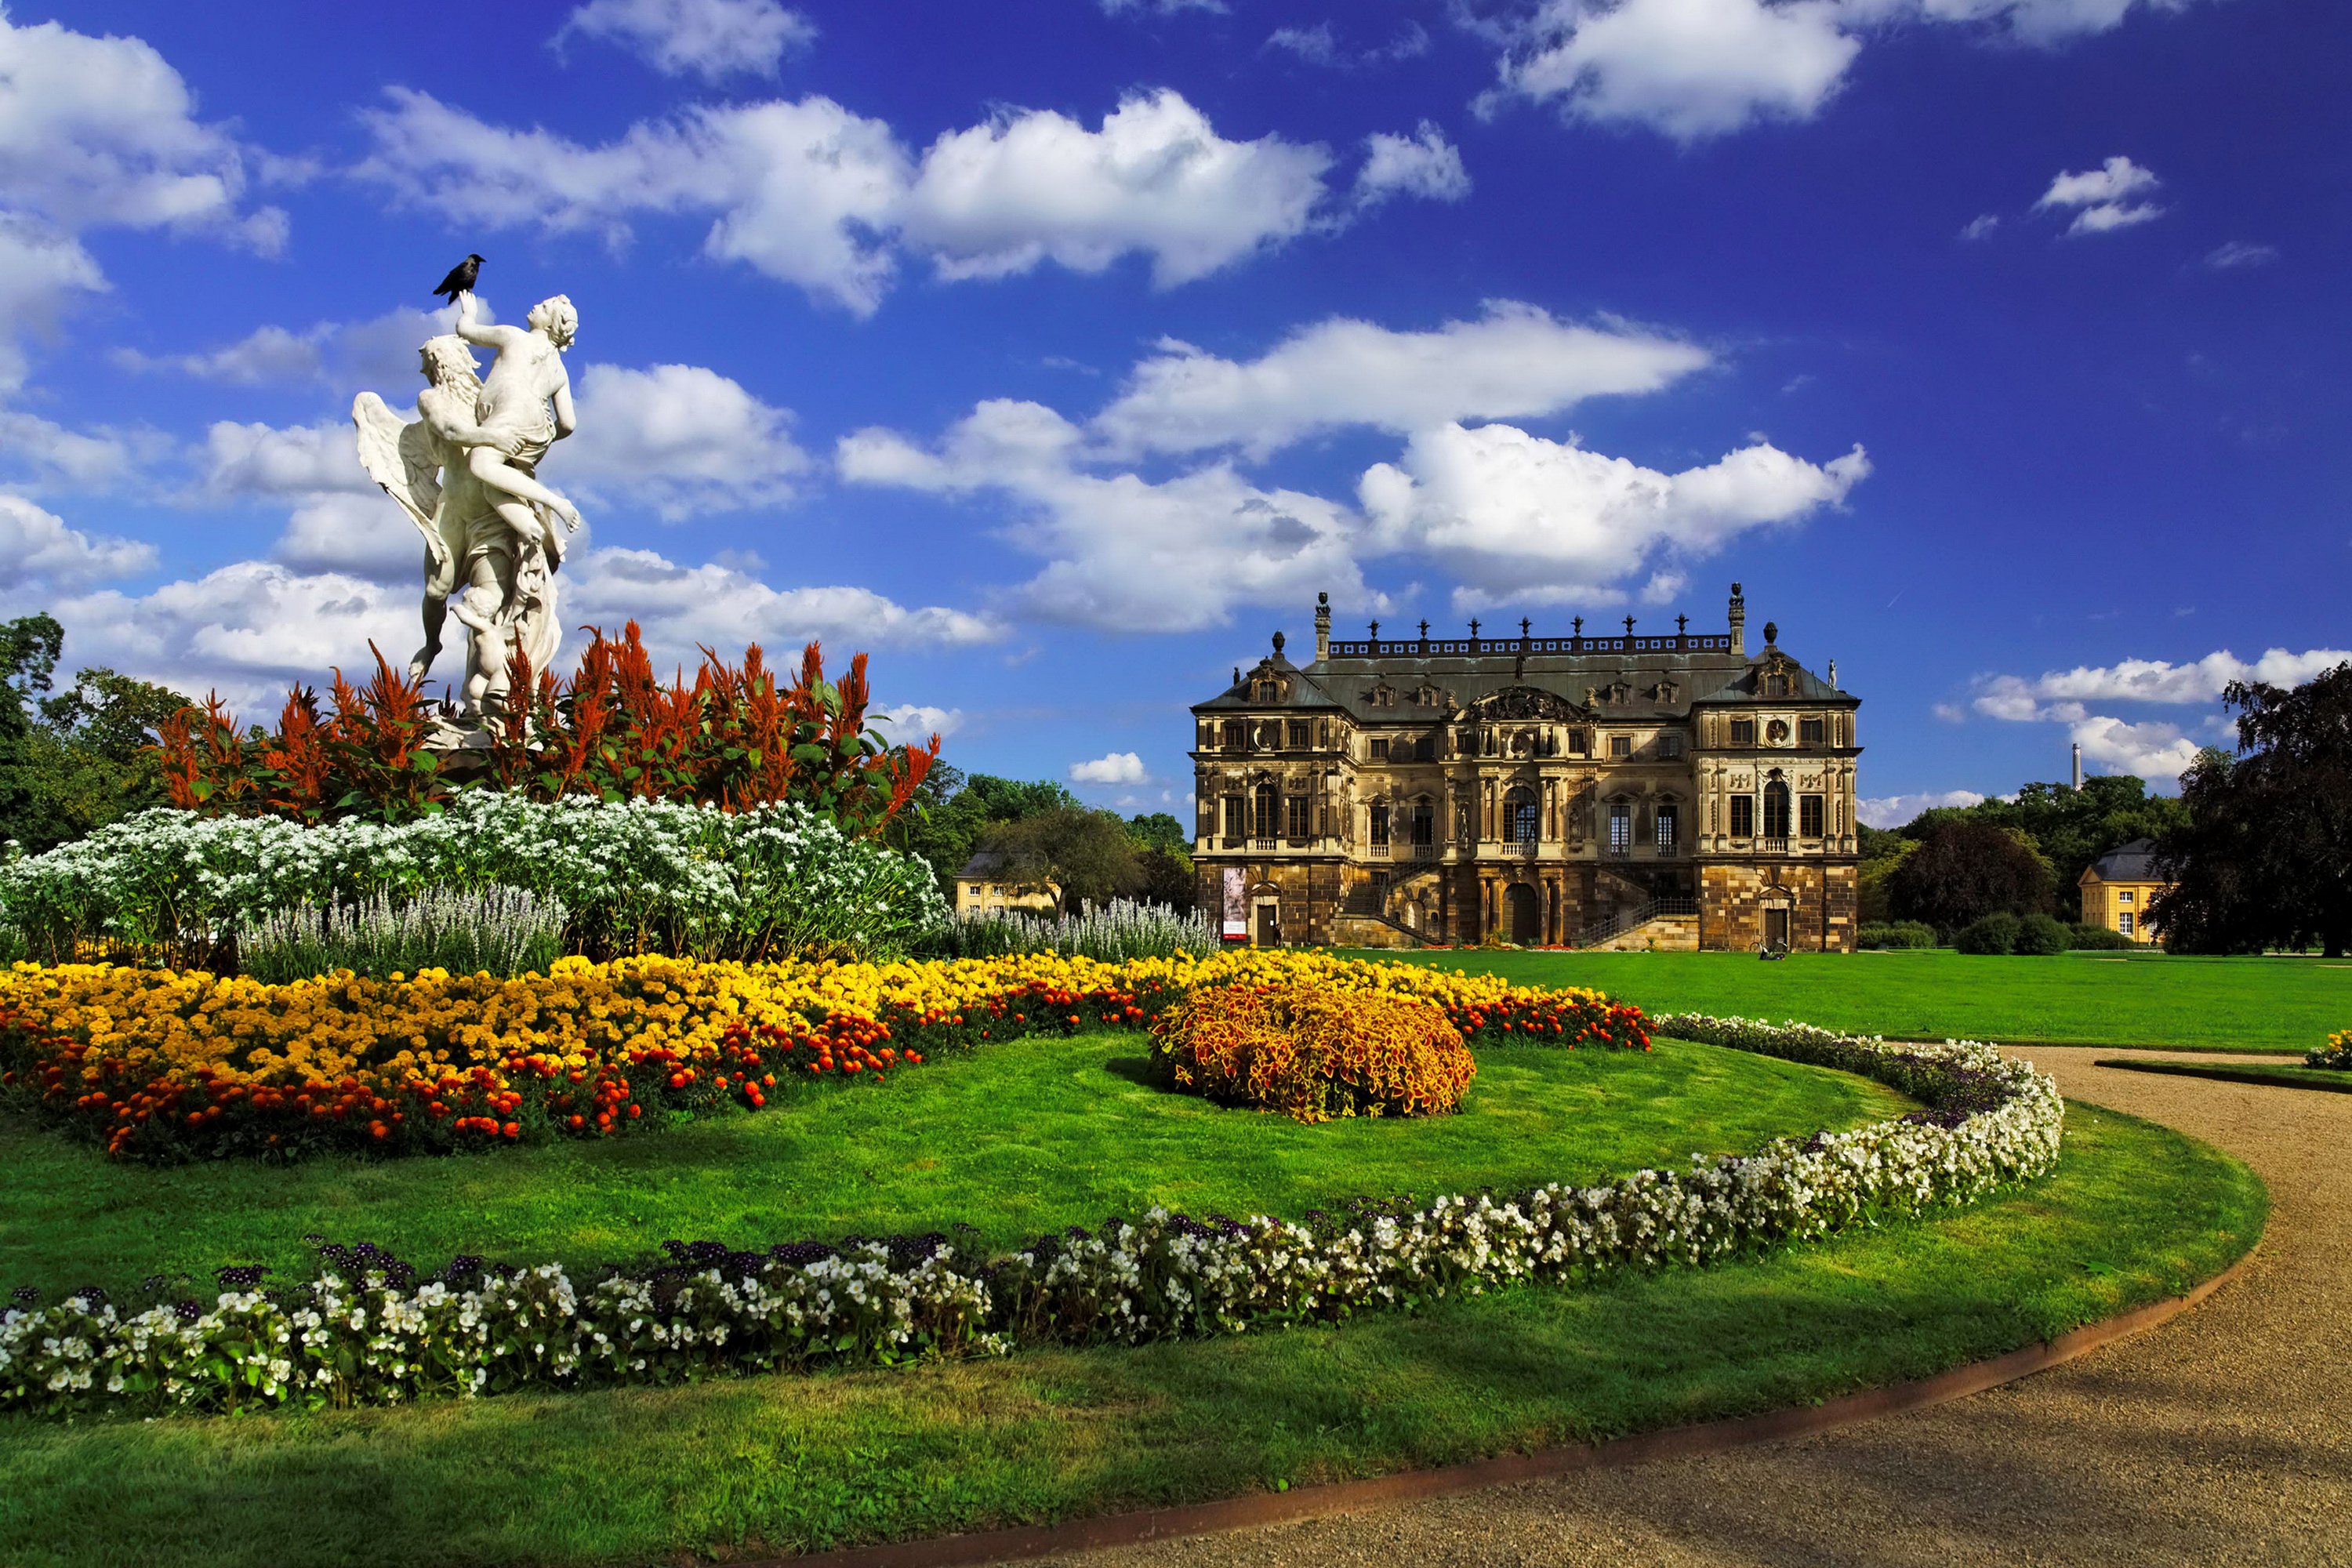 dresden, Germany, Parks, Sculptures, Palace, Lawn, Shrubs, Clouds, Cities Wallpaper